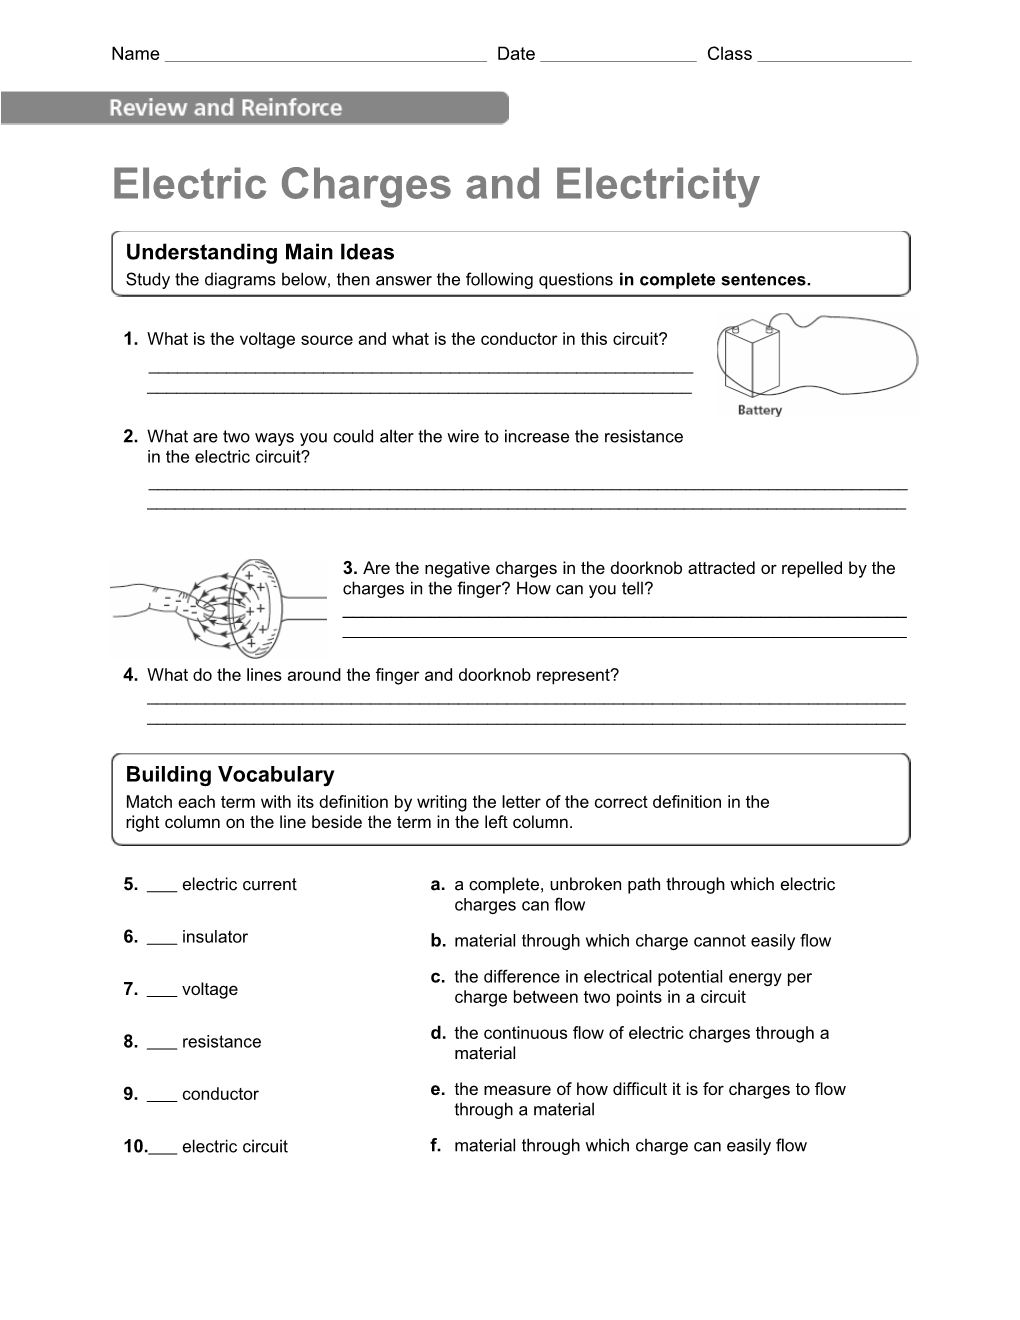 Electric Charges Andelectricity